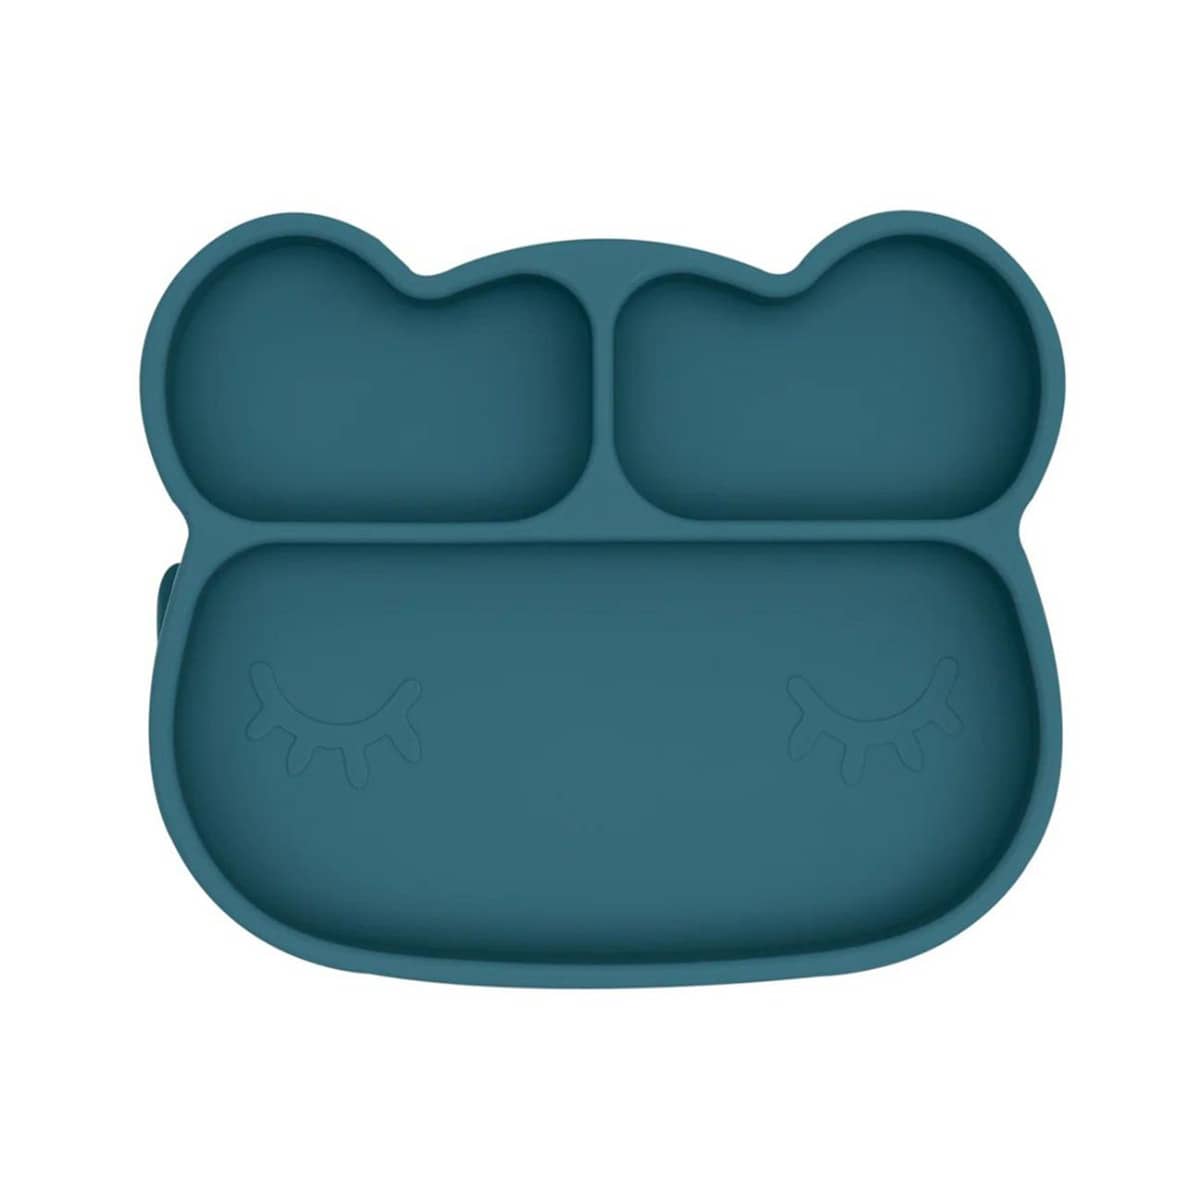 We Might Be Tiny Stickie Silicone Suction Plate - Bear - Blue Dusk